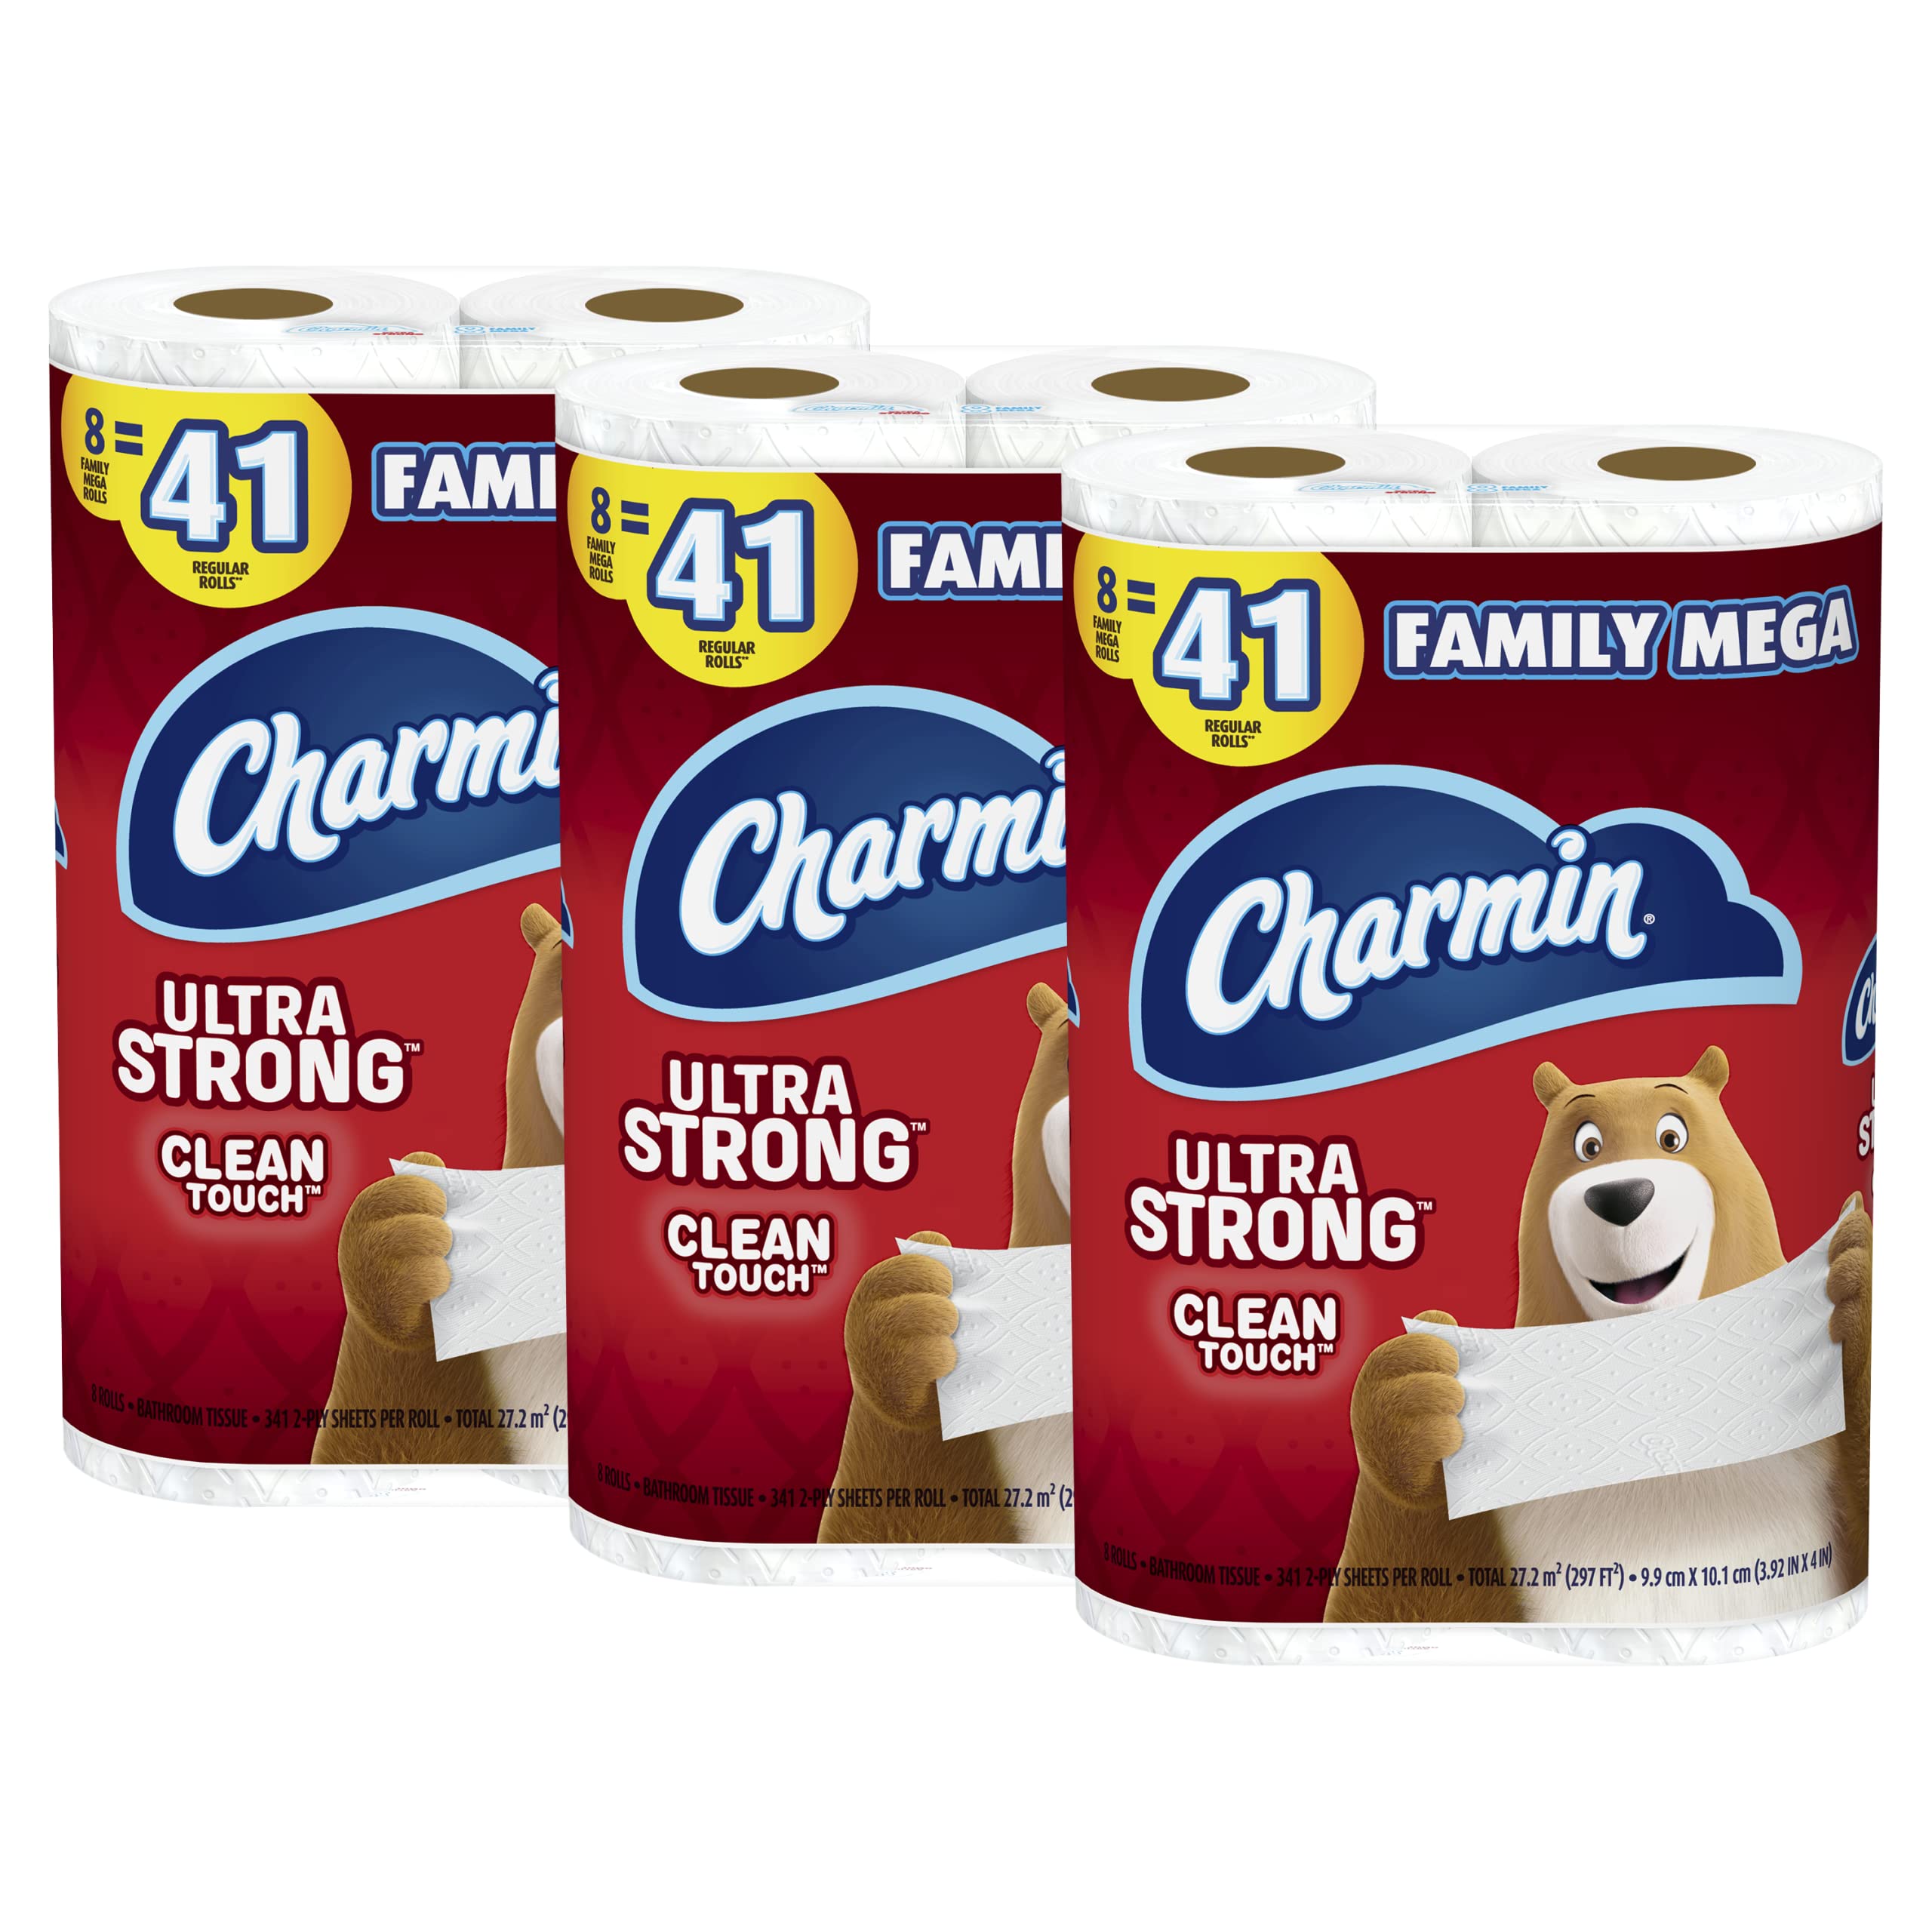 Charmin Ultra Strong Toilet Paper (Old)